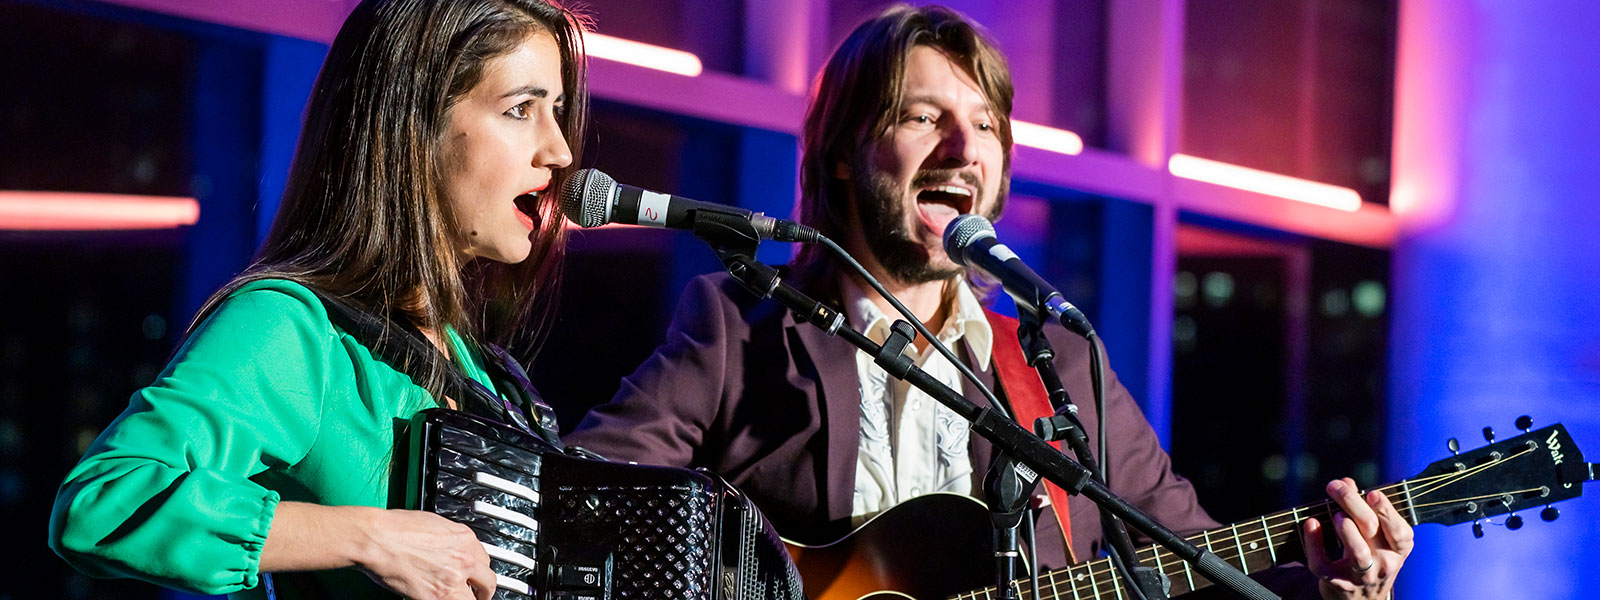 Alumnus Justin Poindexter and his wife Sasha Papernik performing at the "Powering Creativity" campaign launch event in New York / Photo: Chris Lee